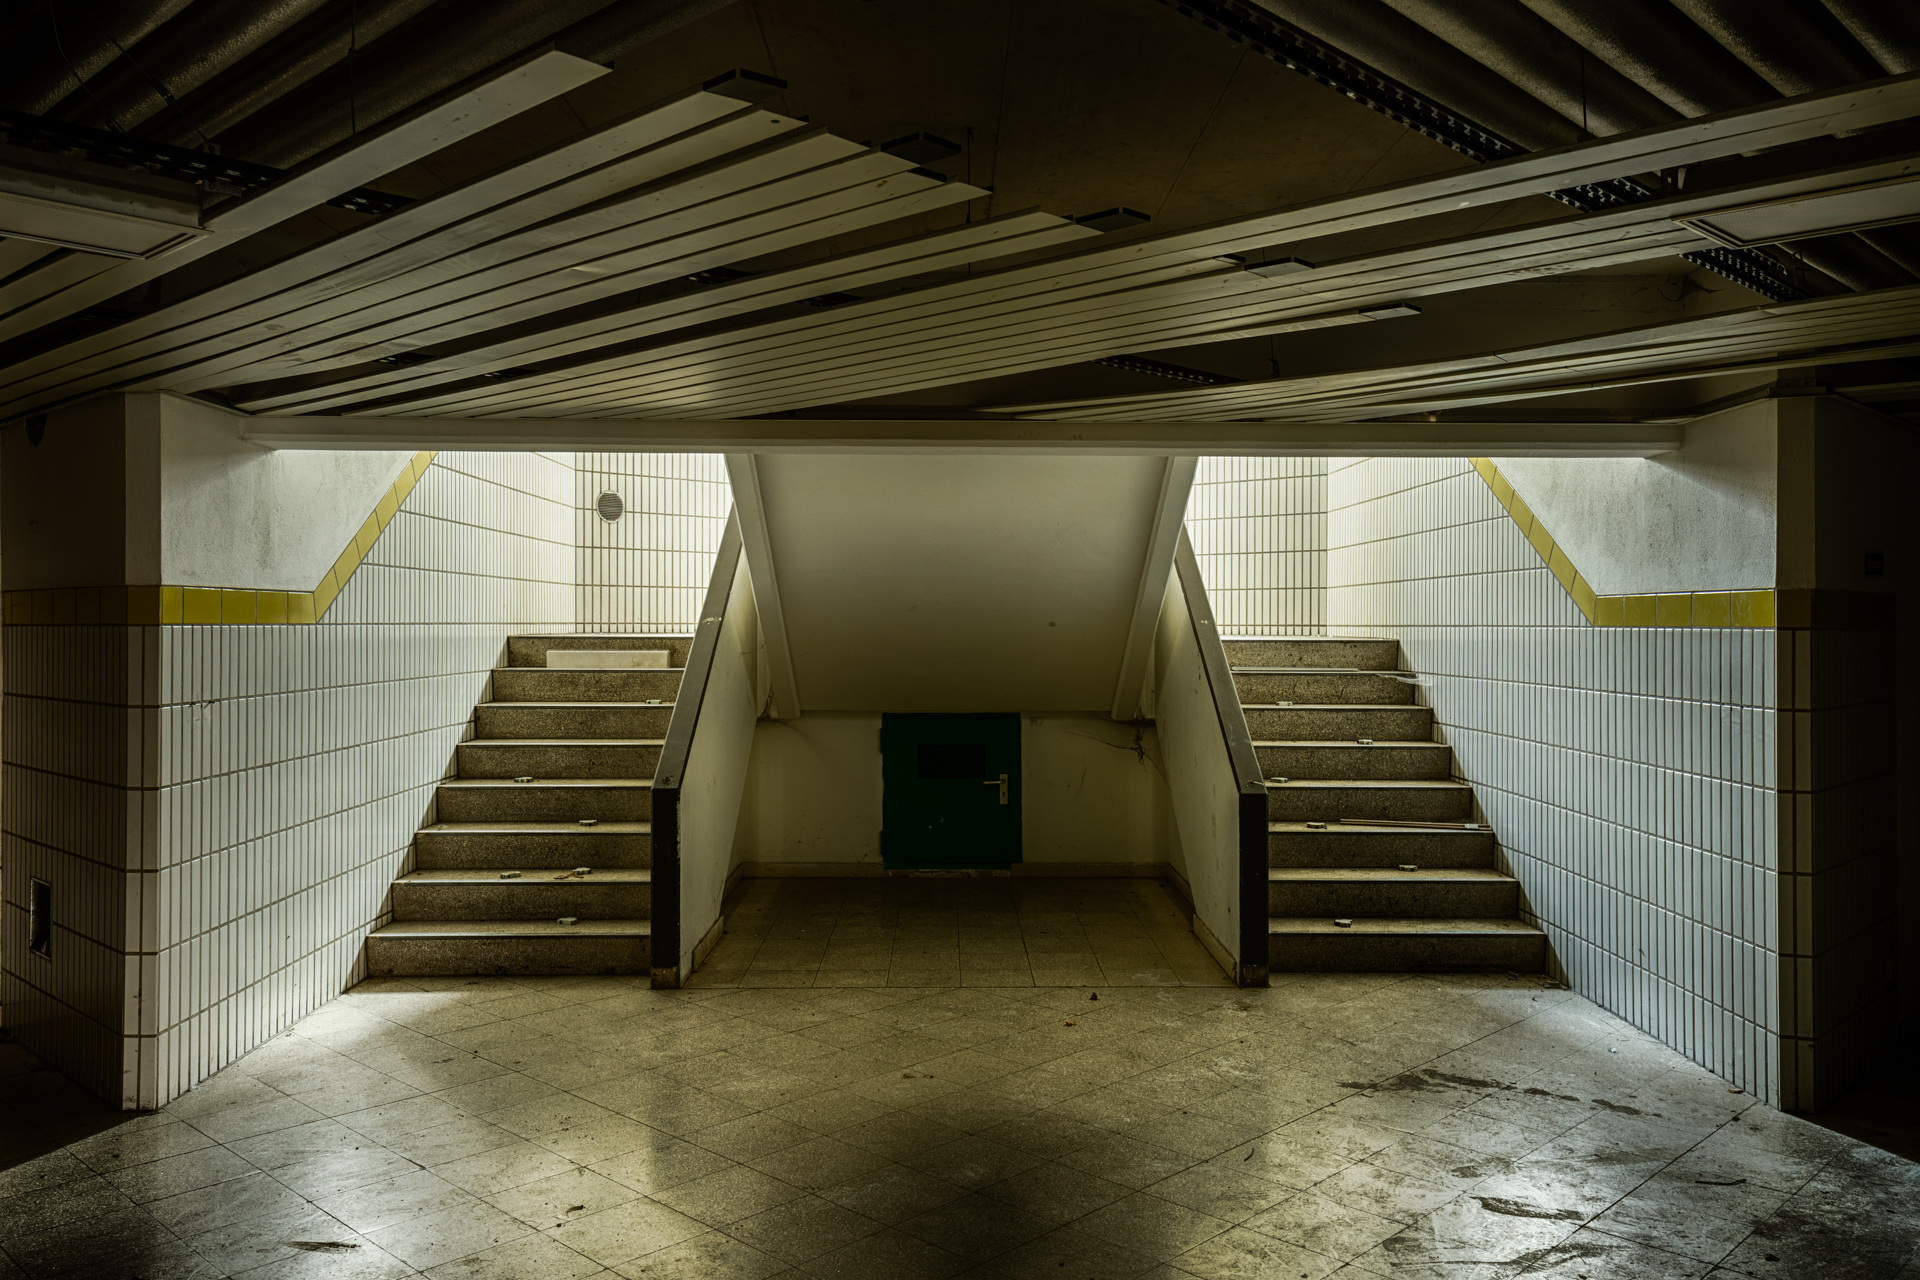 Urban Exploration - Military Peace - Double Stairs - Basement